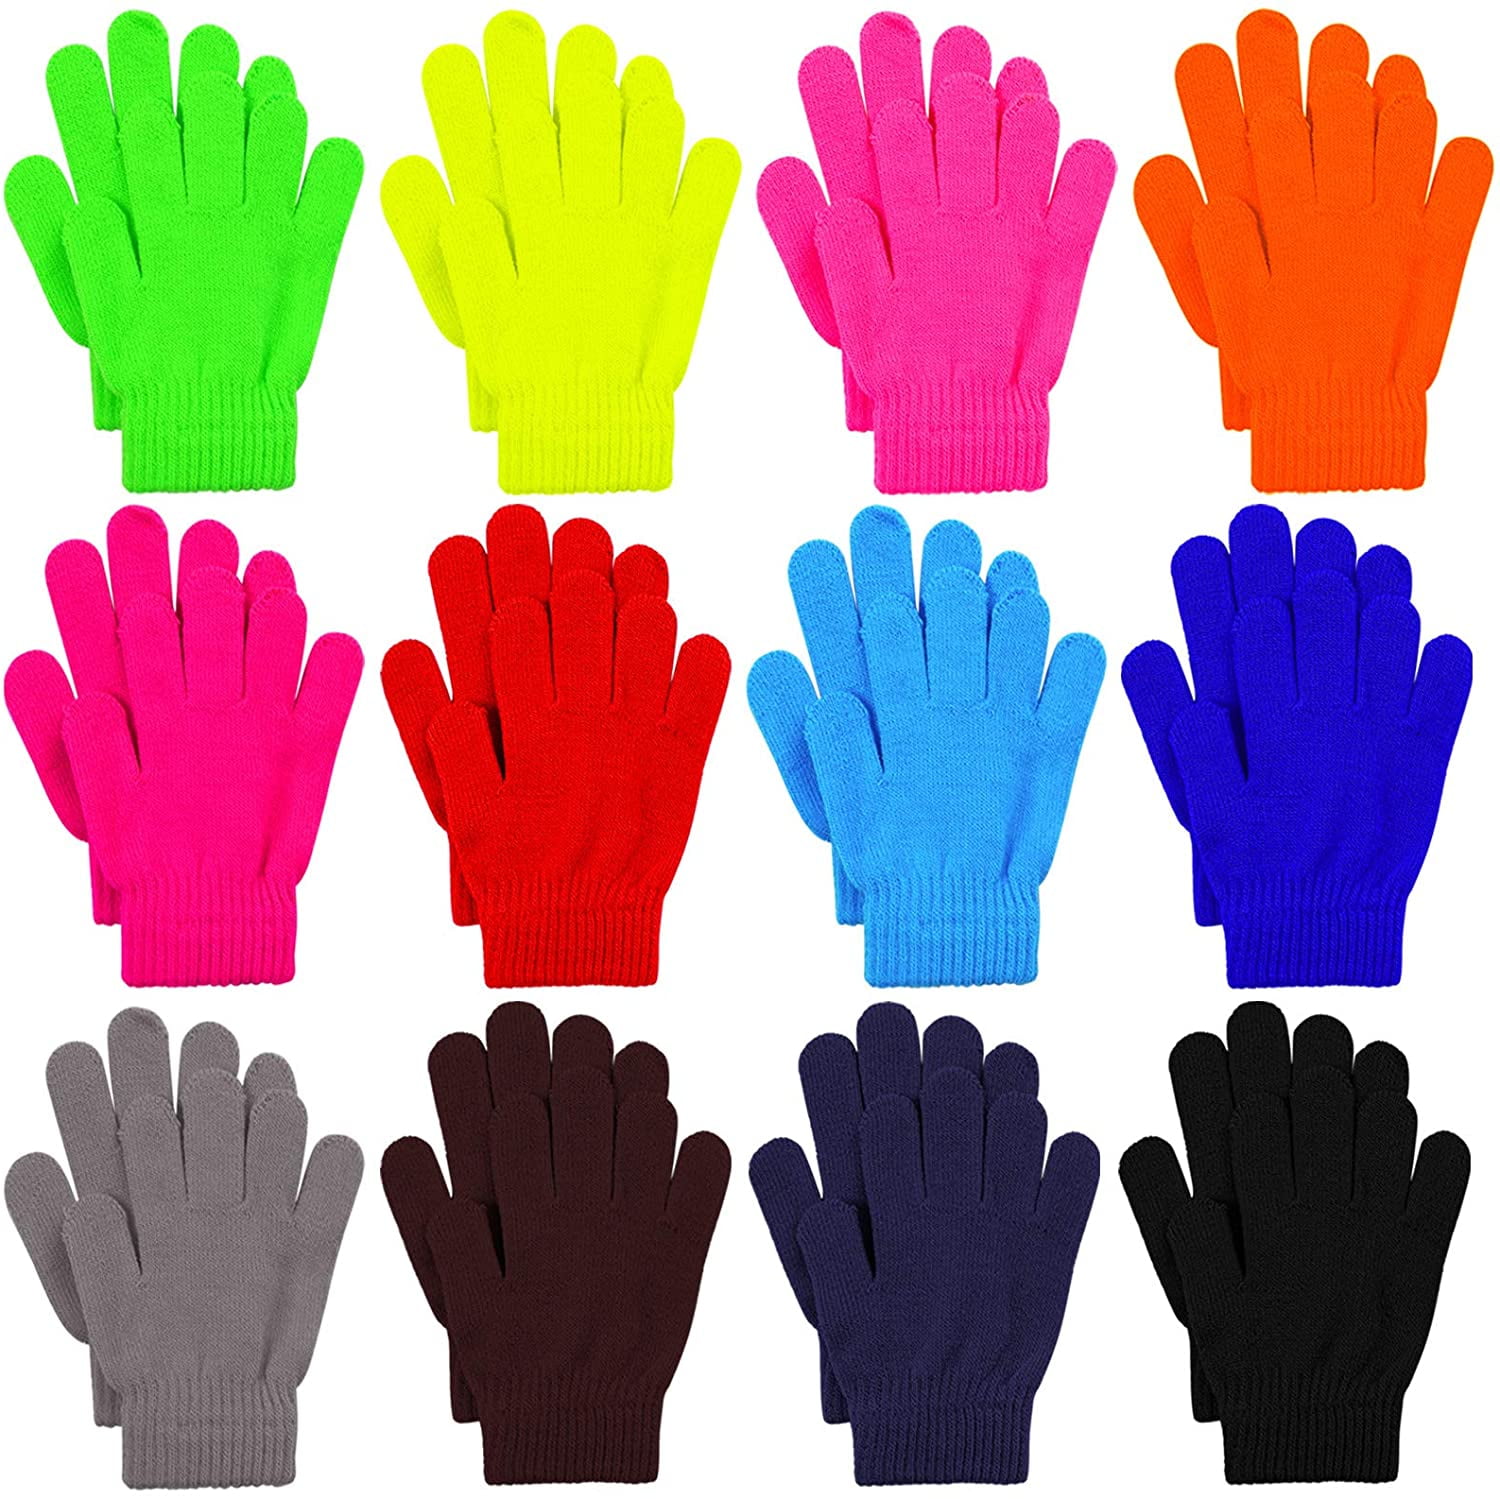 Cooraby 12 Pairs Kids Warm Magic Gloves Teens Winter Stretchy Knit Gloves Boys Girls Knit Gloves 